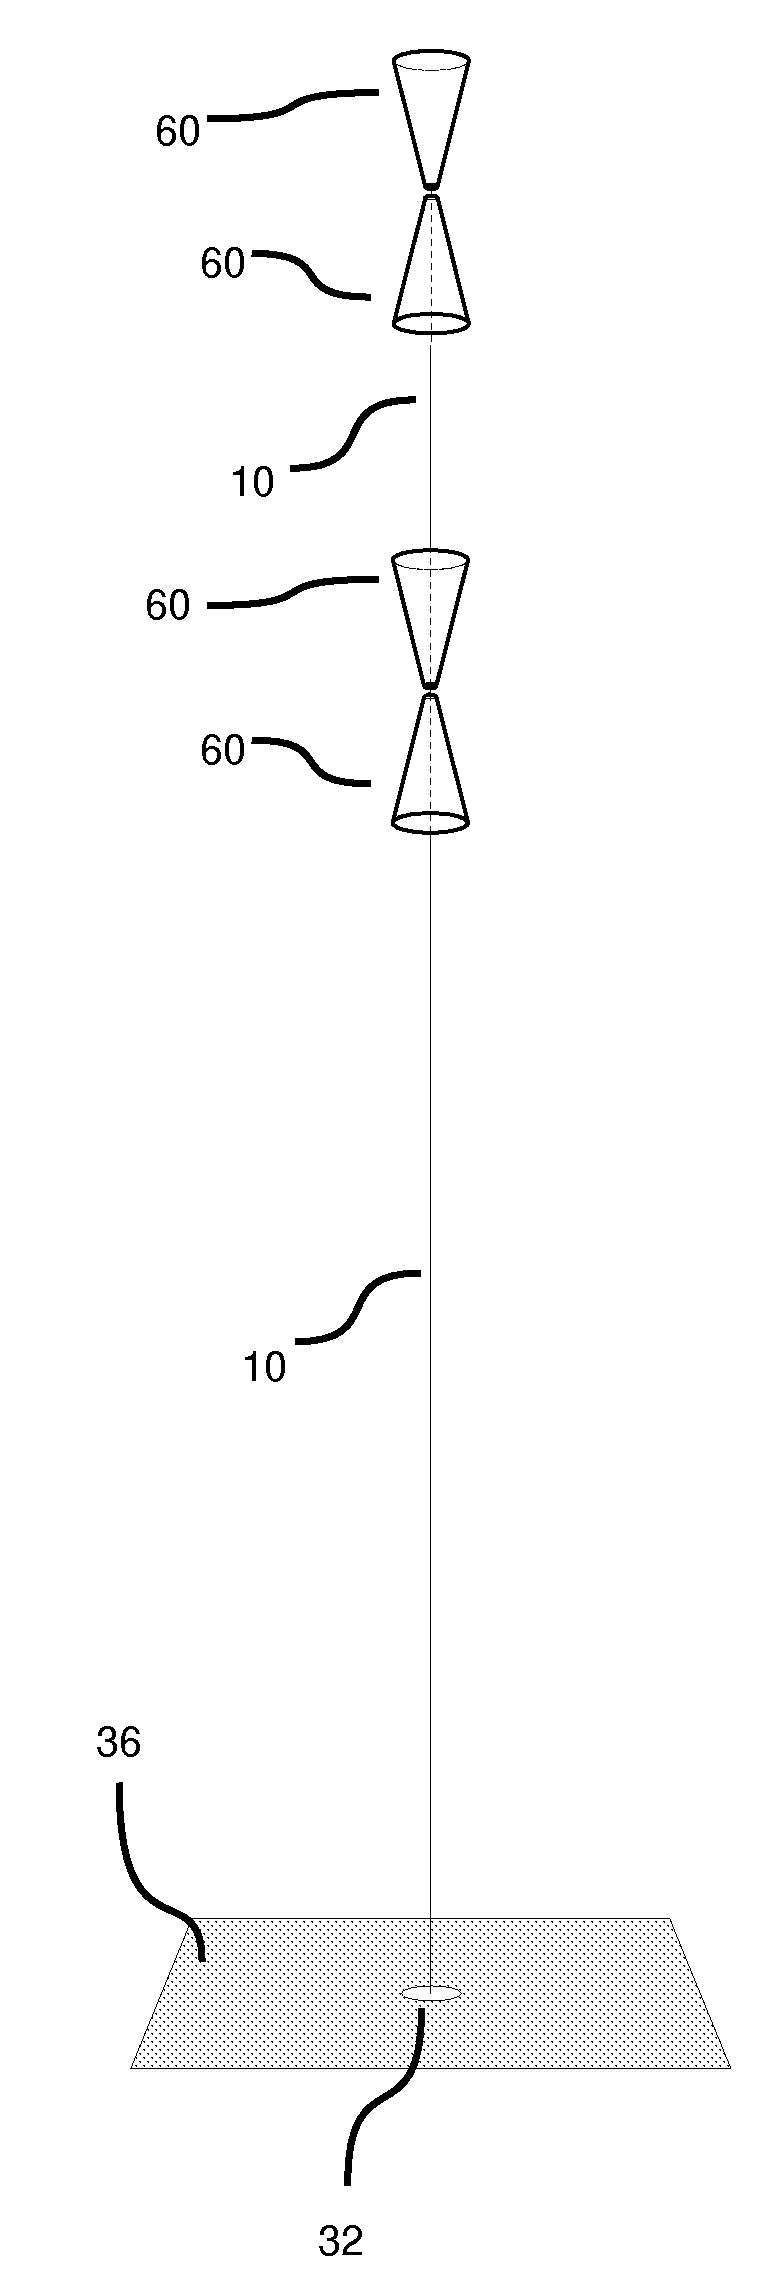 System and apparatus for transmitting a surface wave over a single conductor